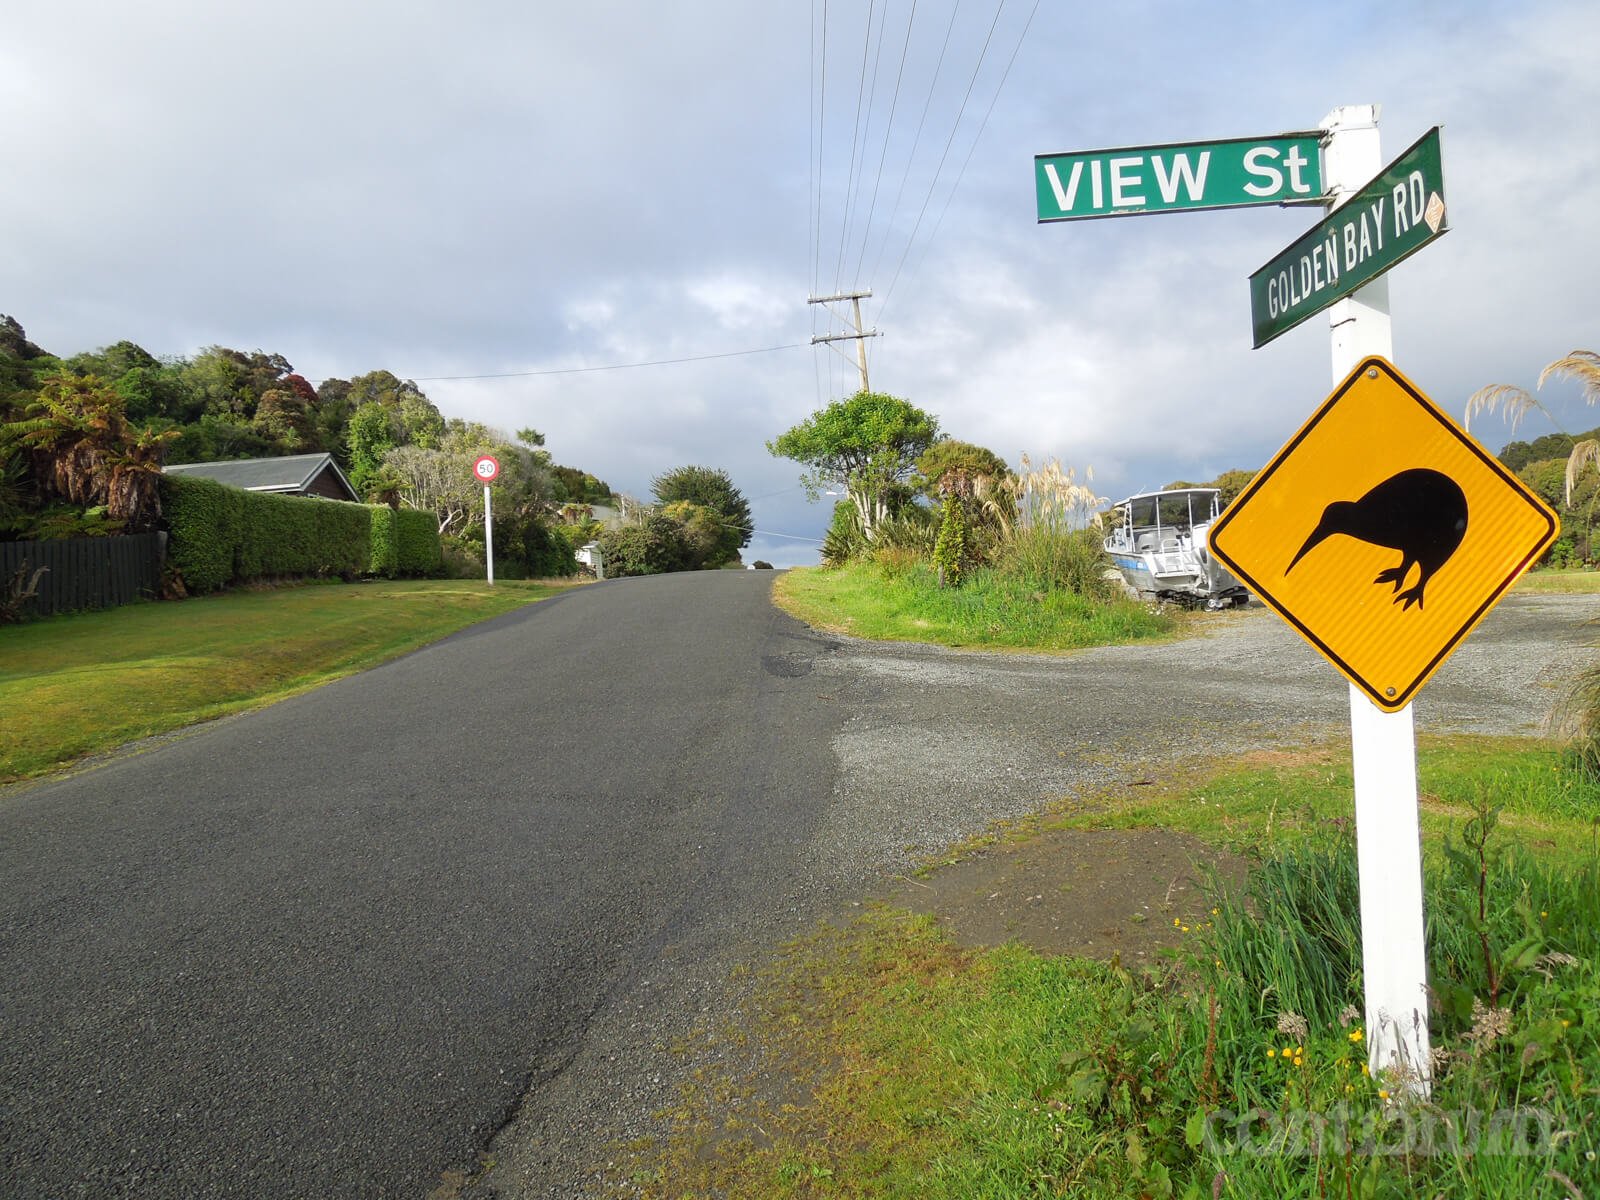 Golden Bay Road, Stewart Island - where to go to see Kiwis in New Zealand